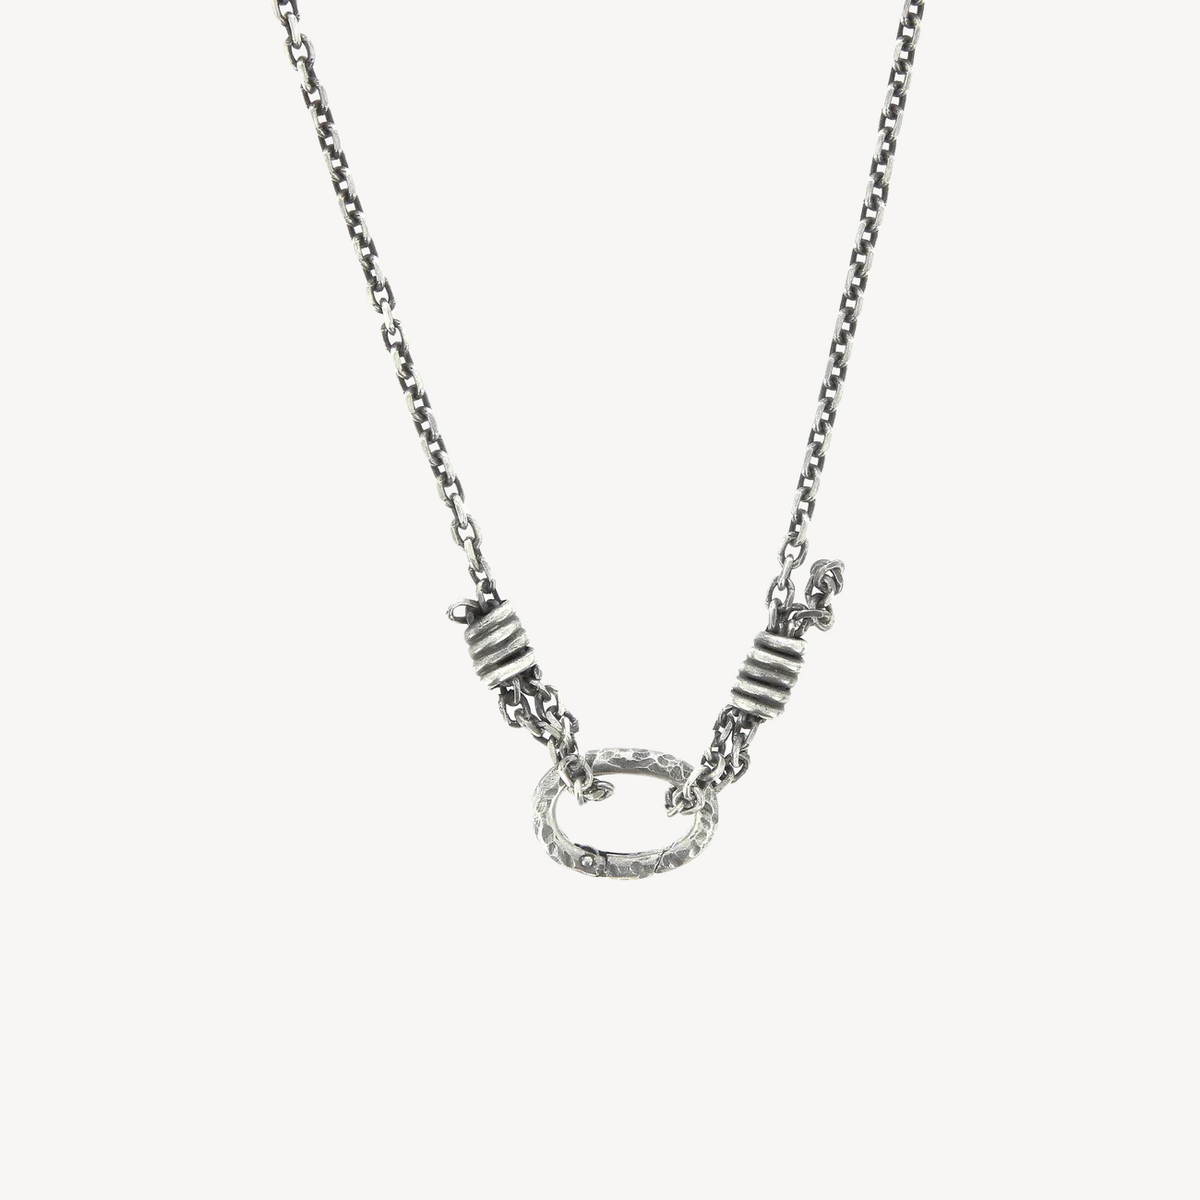 Front clasp chain